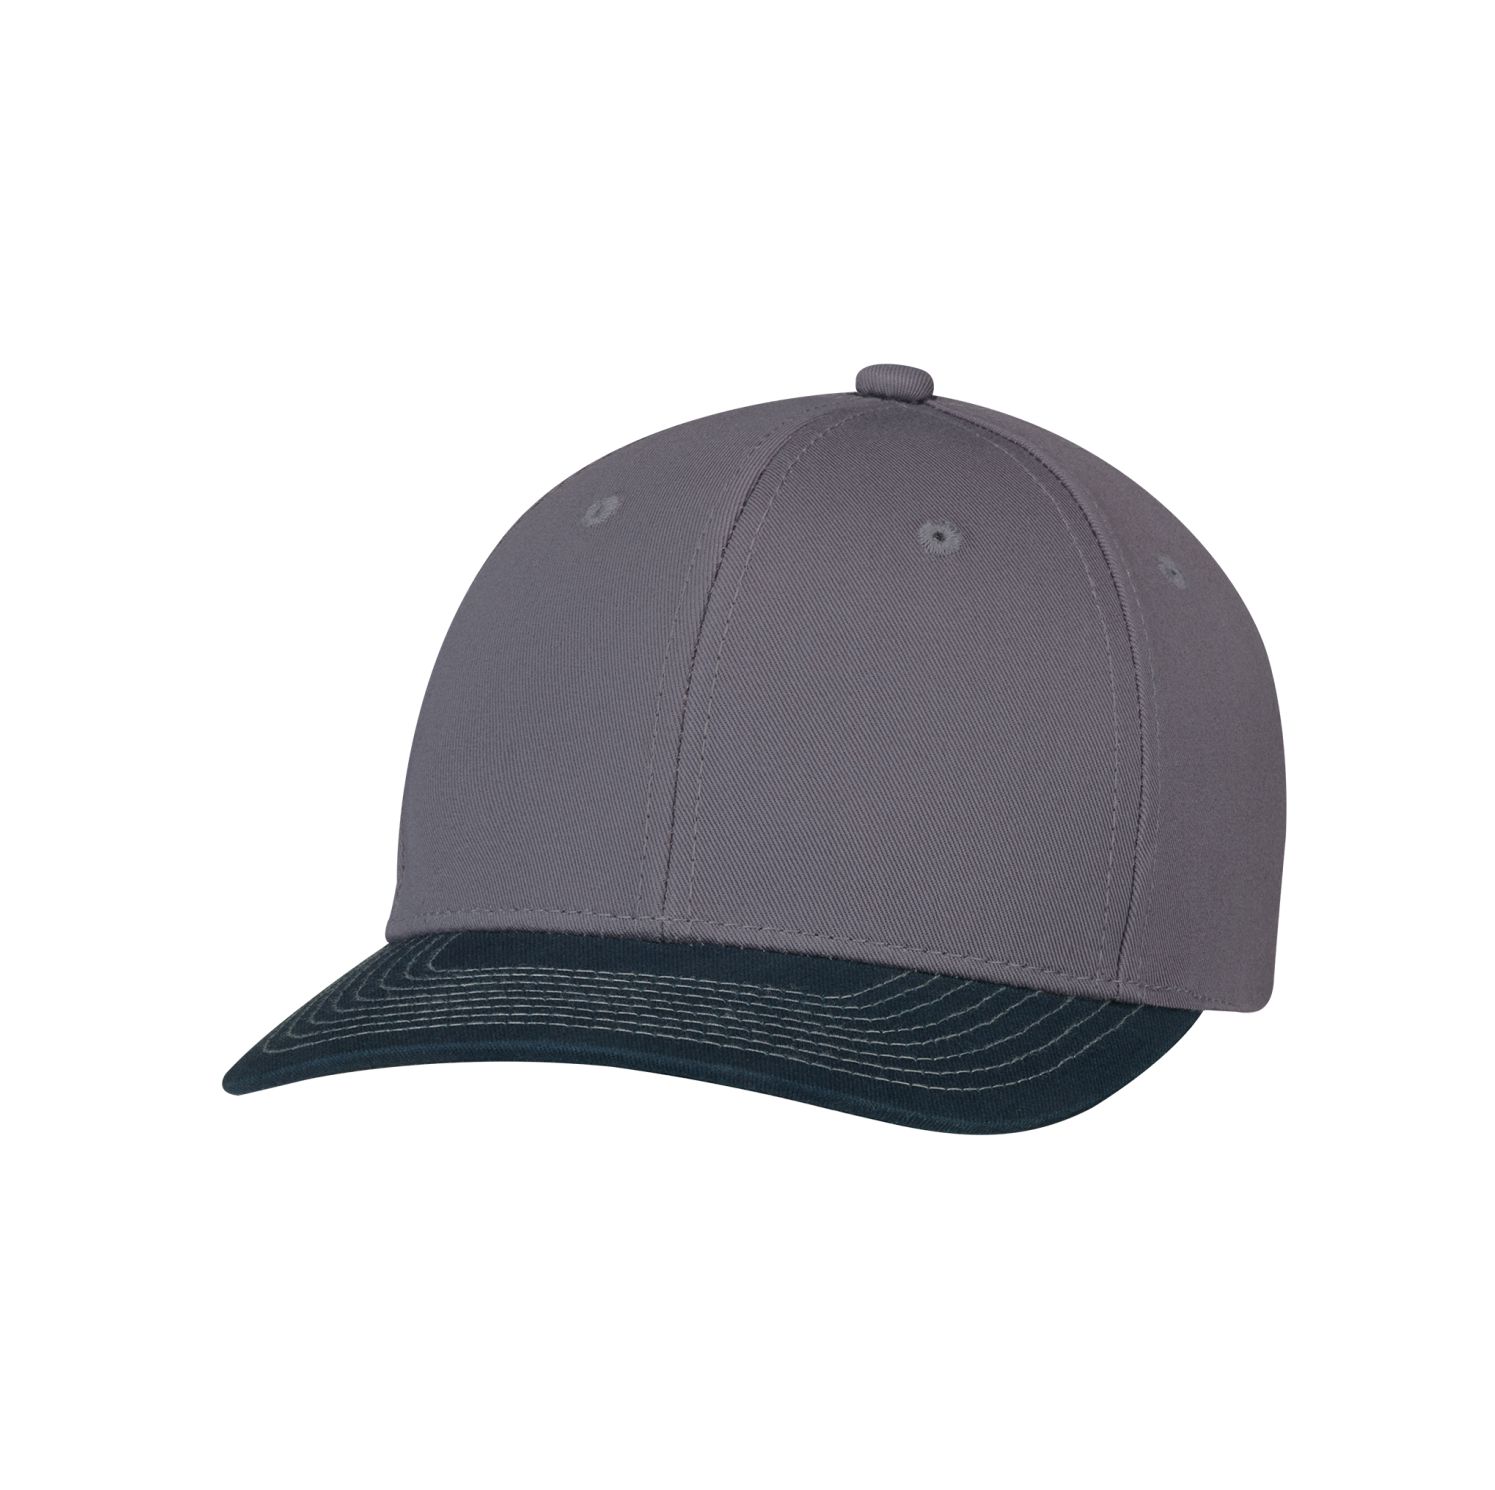 AJM 6-Panel Constructed Pro-Round Hat #8F010M Navy / Charcoal